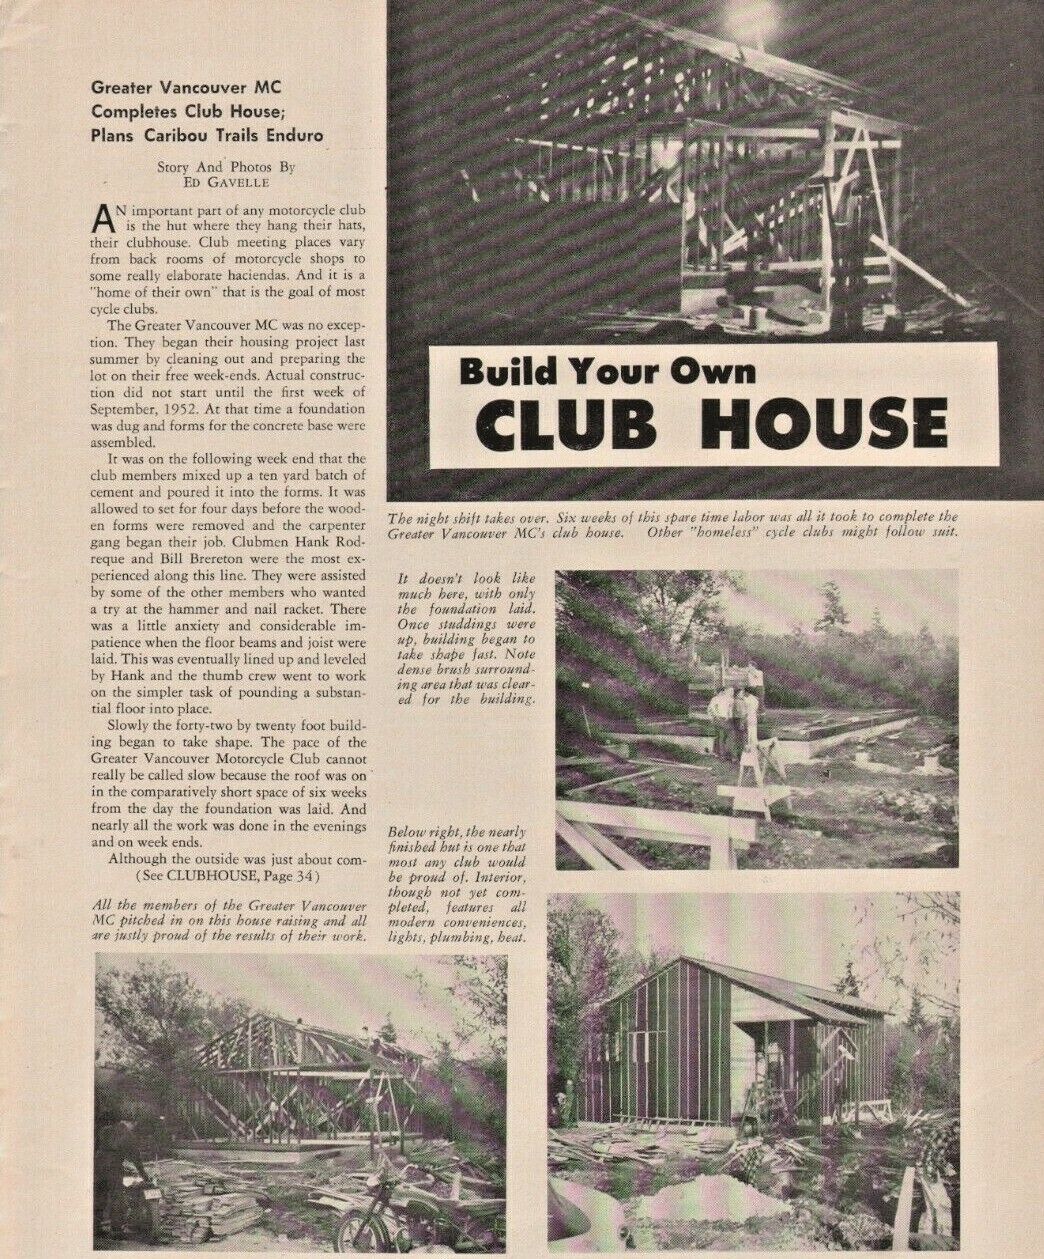 1953 Greater Vancouver Motorcycle Club House - 2-Page Vintage Article